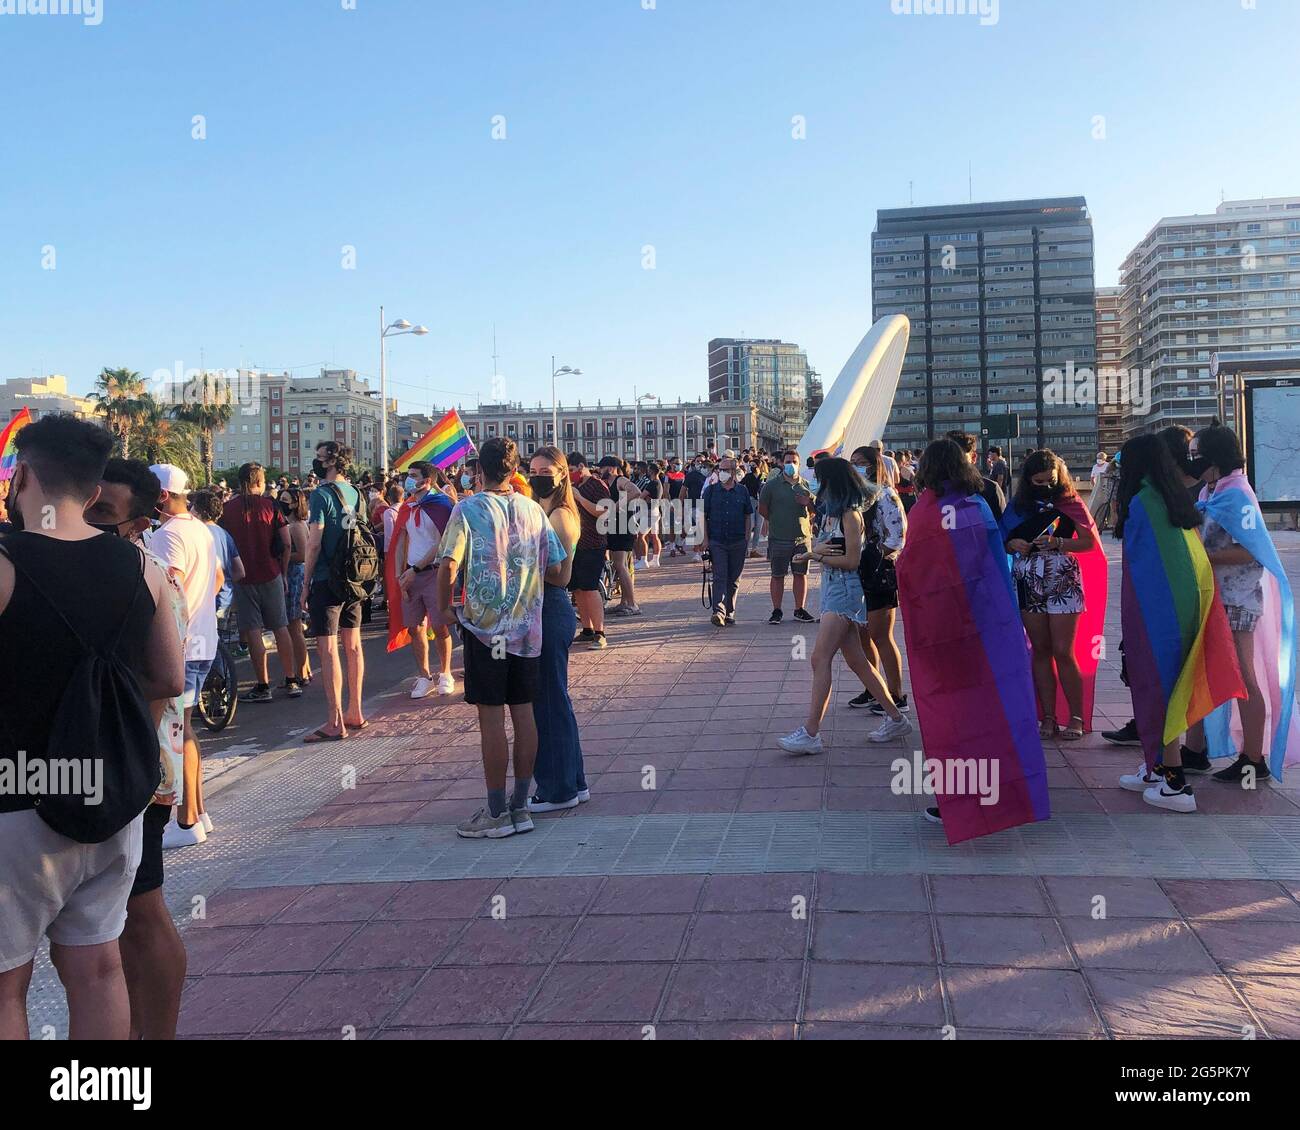 VALENCIA, SPAIN - Jun 28, 2021: Young people in LGBT Pride Manifestation 2021 in the city of Valencia as a celebration of the International Gay Pride Stock Photo